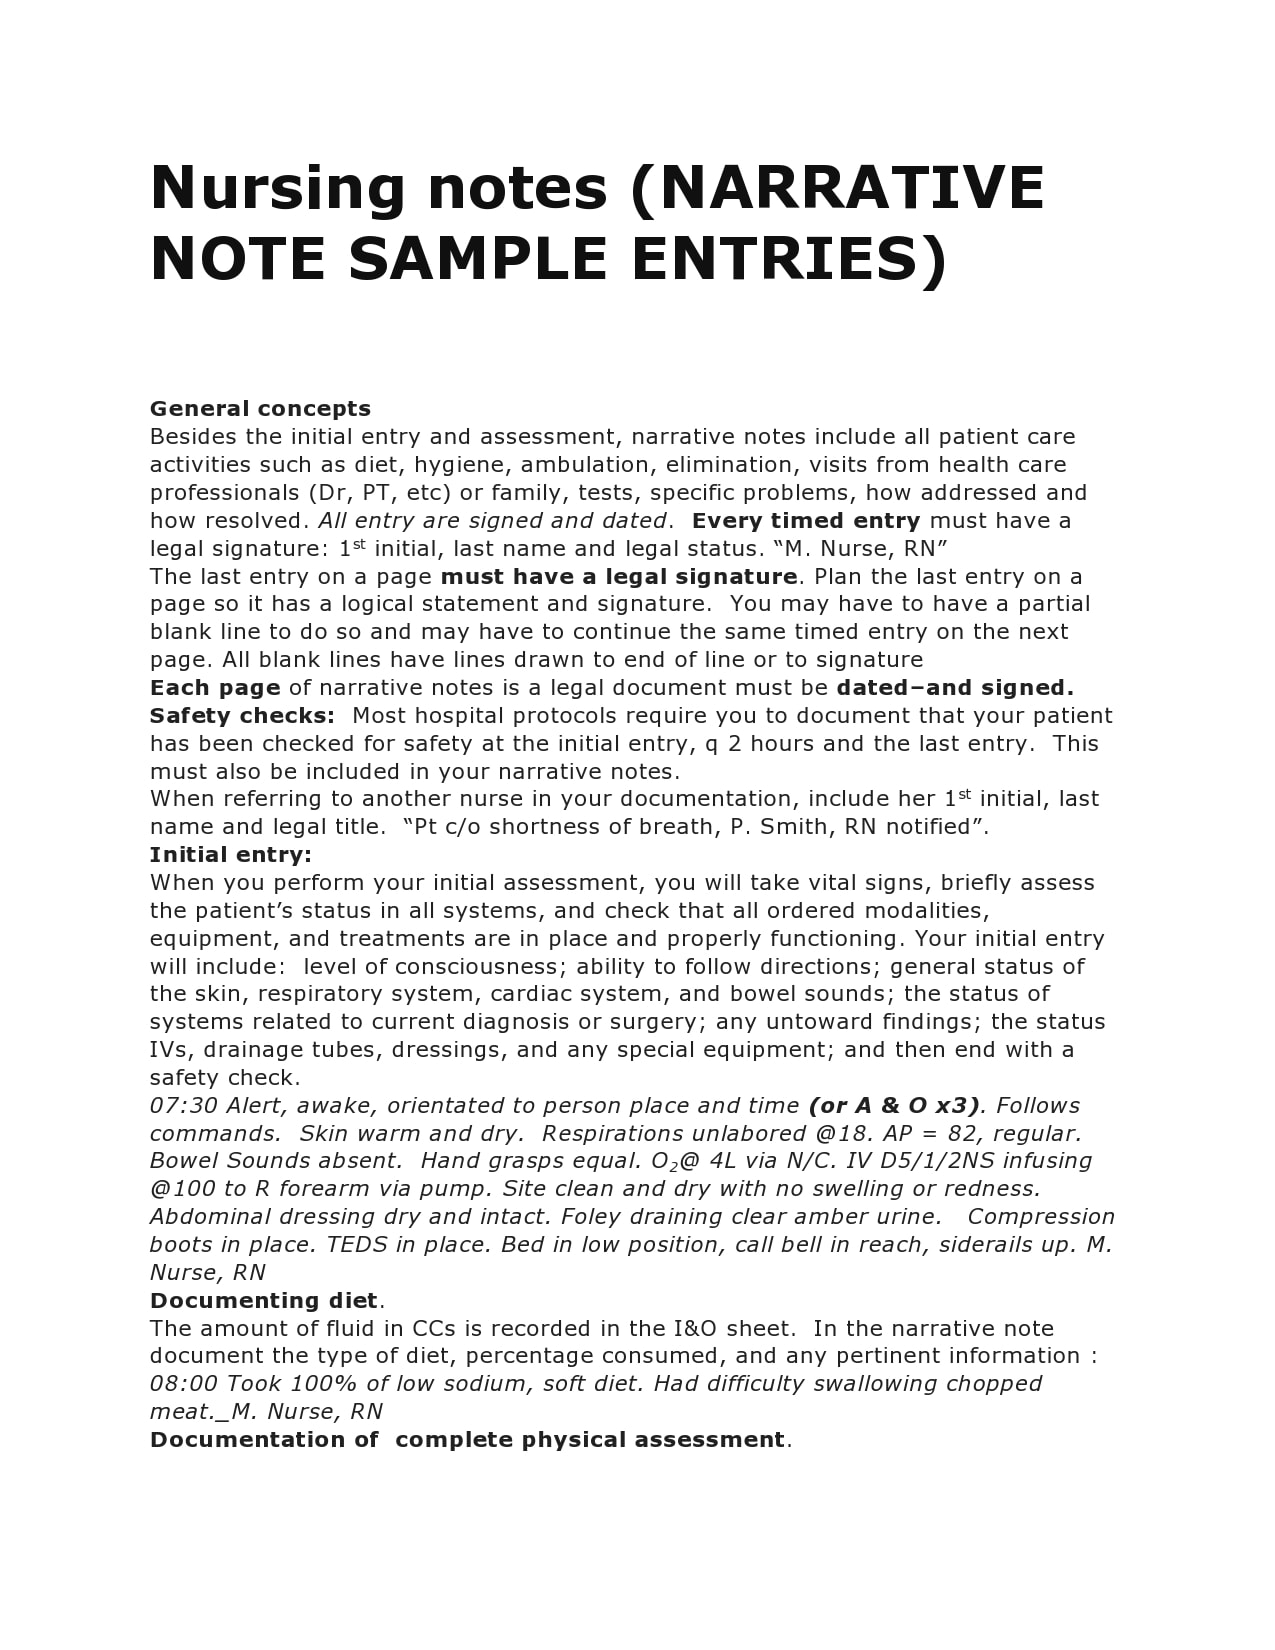 22 Useful Nursing Note Samples (+Templates) - TemplateArchive Within Nurse Notes Template